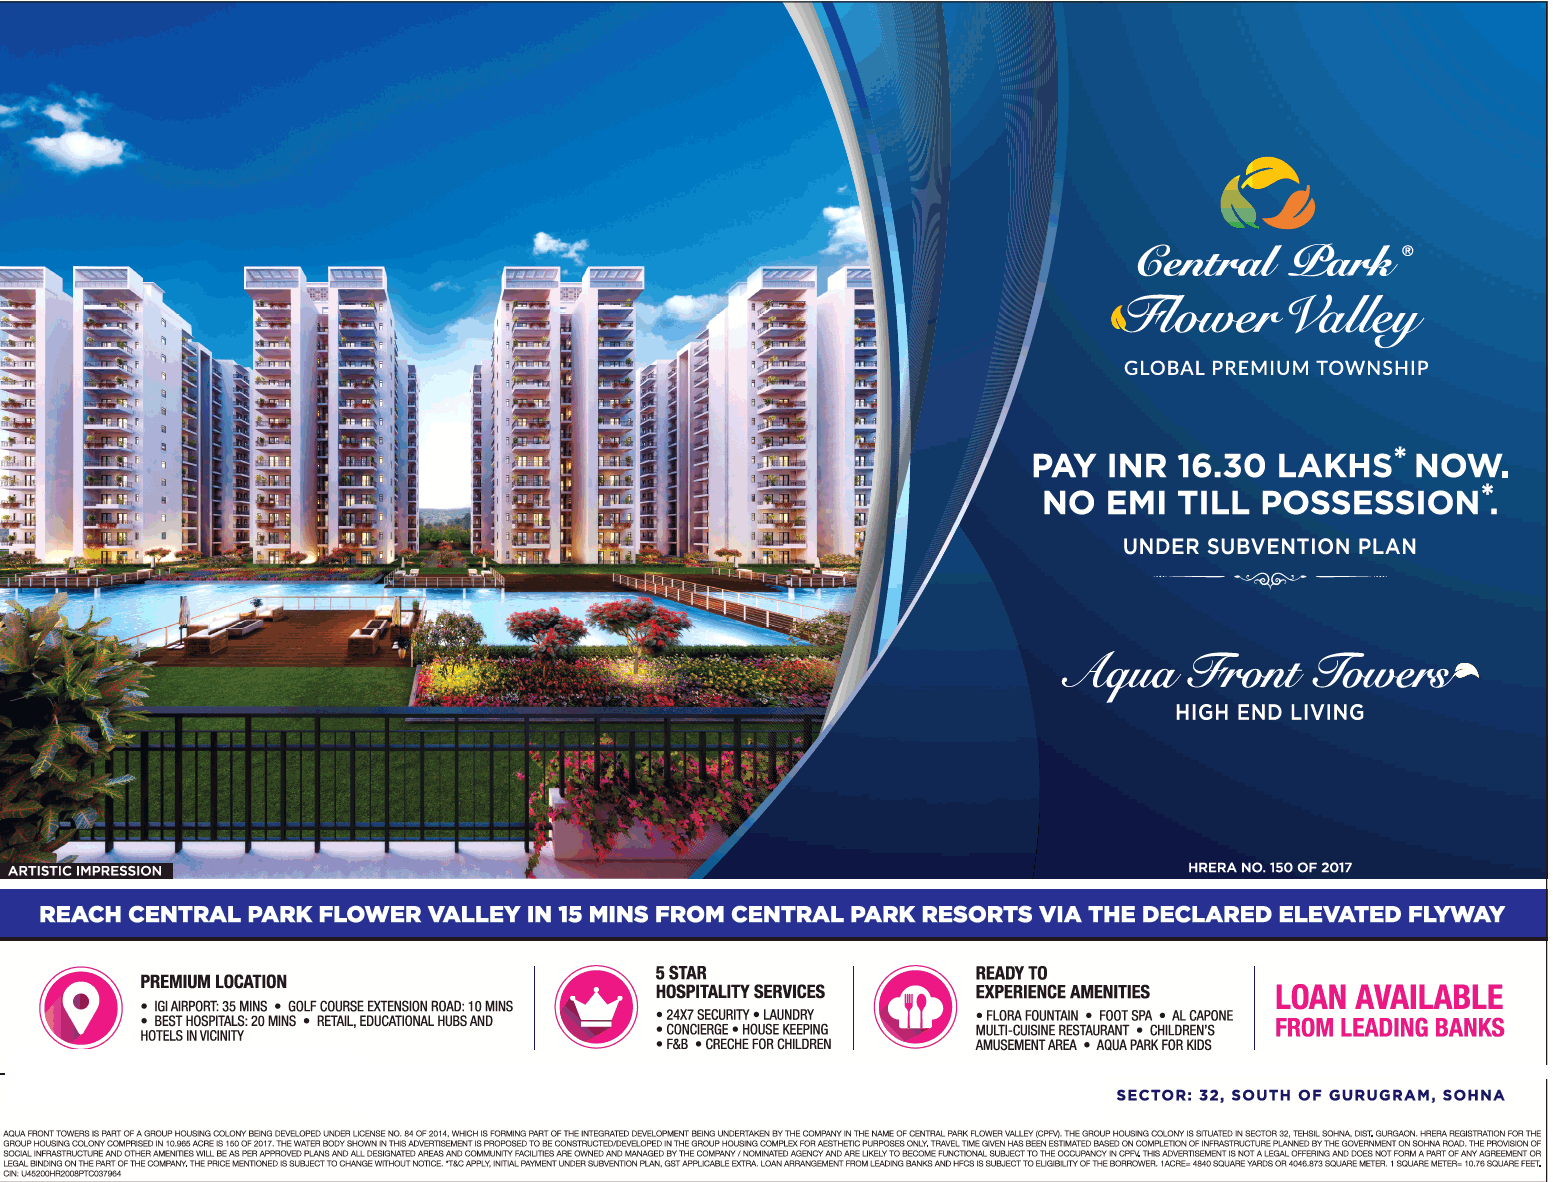 Pay No EMI till possession at Central Park Aqua Front Tower  in Gurgaon